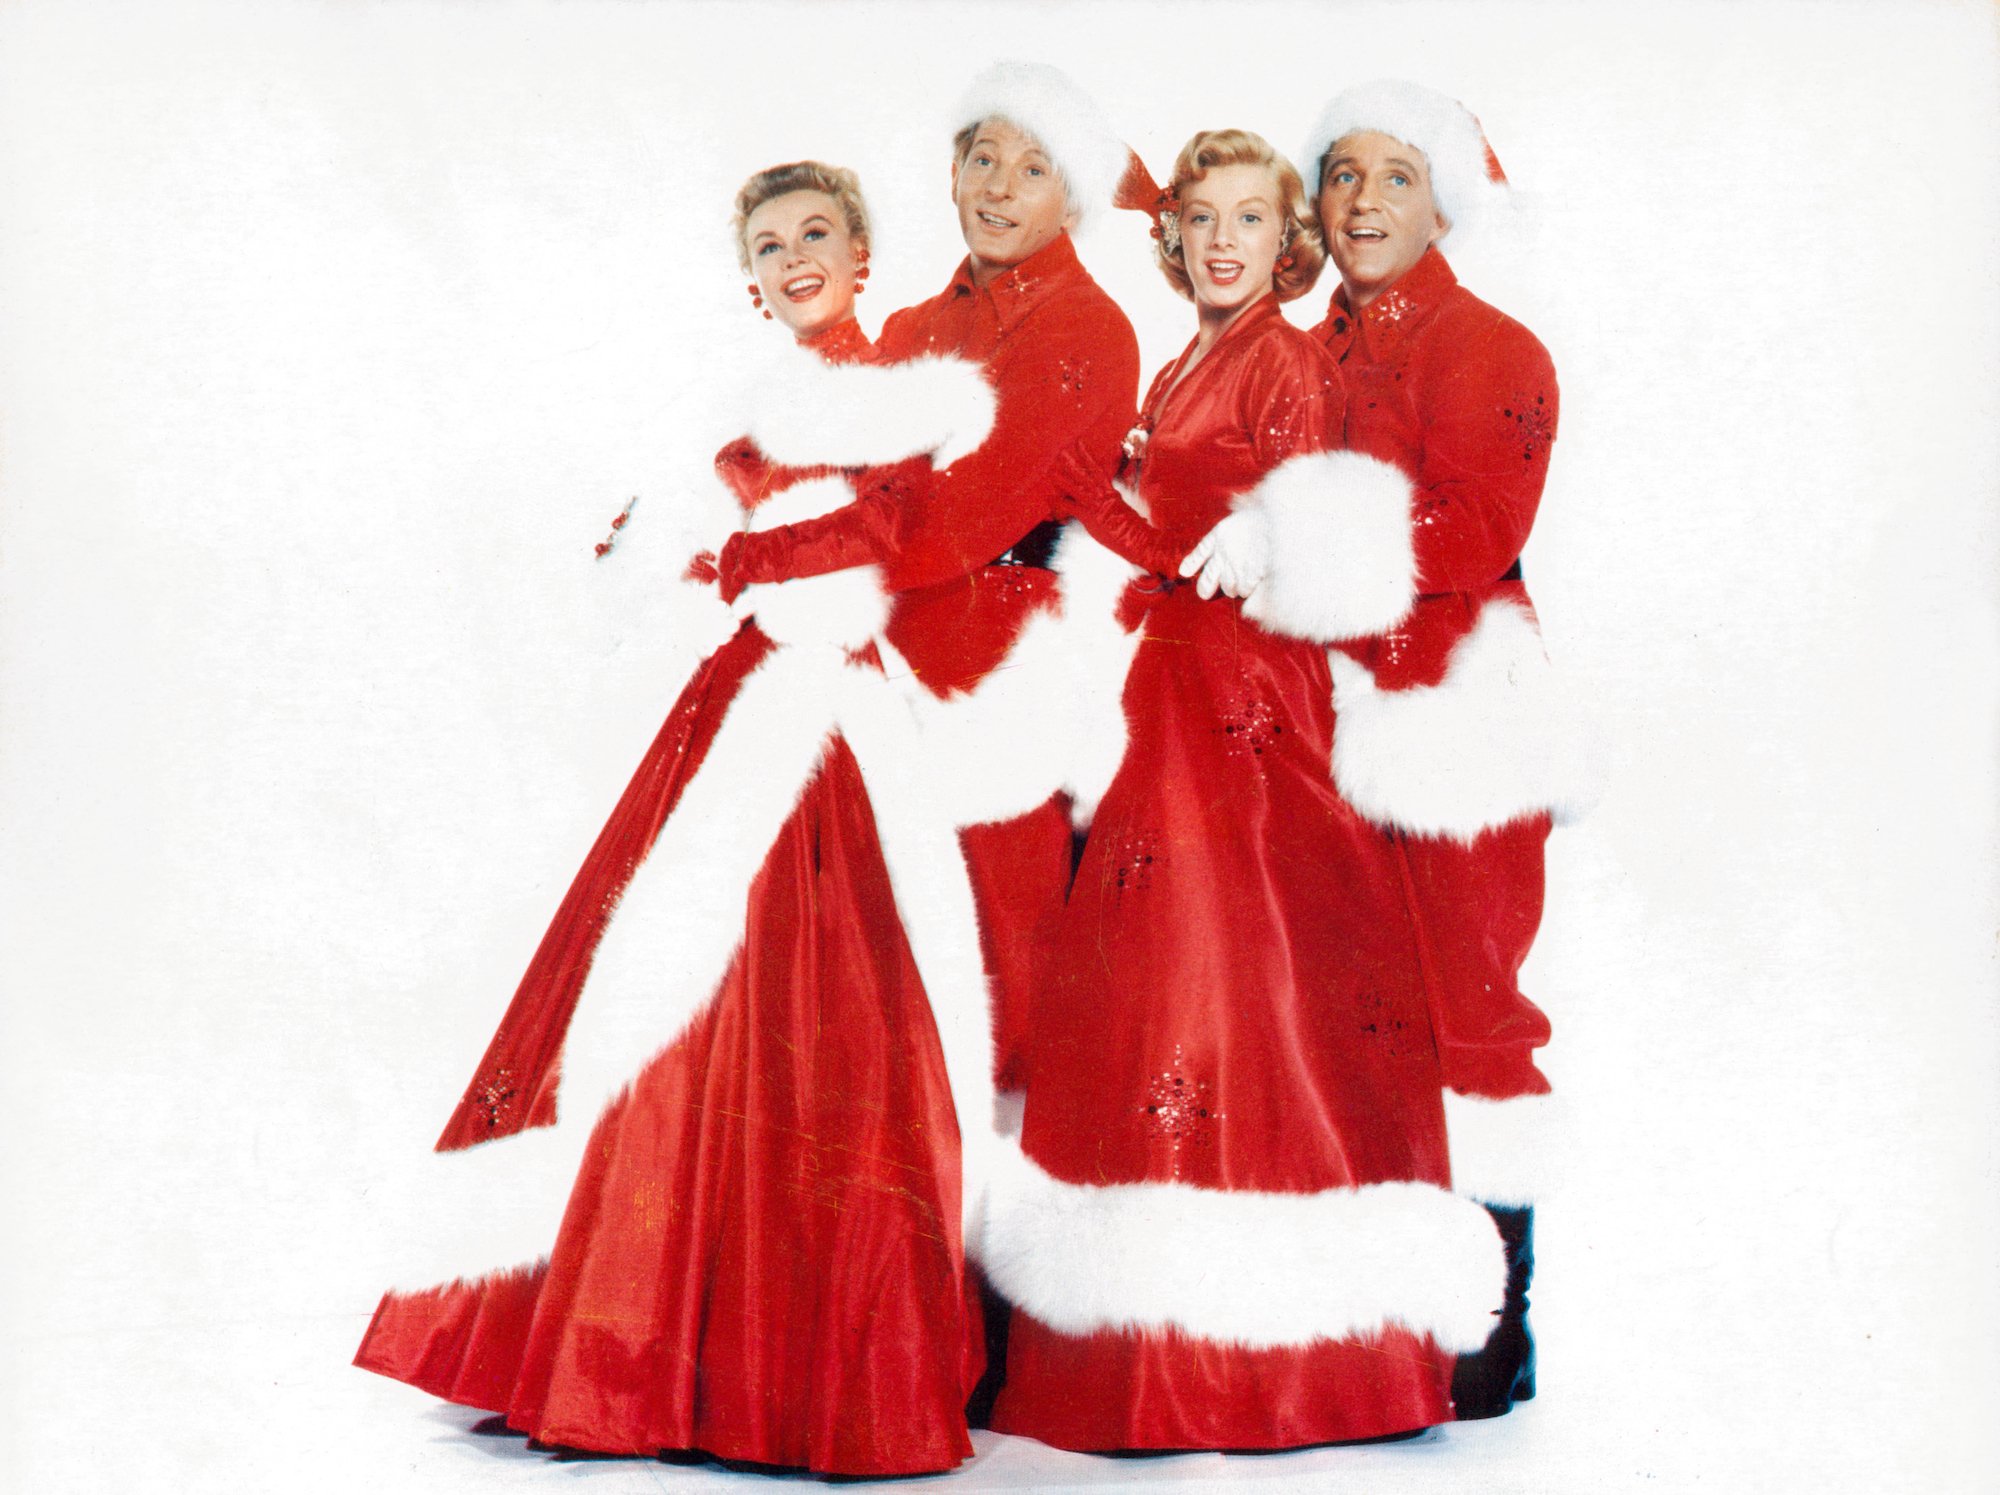 (L-R) Vera-Ellen, Danny Kaye, Rosemary Clooney, and Bing Crosby smiling in front of a white background in Christmas stage costumes